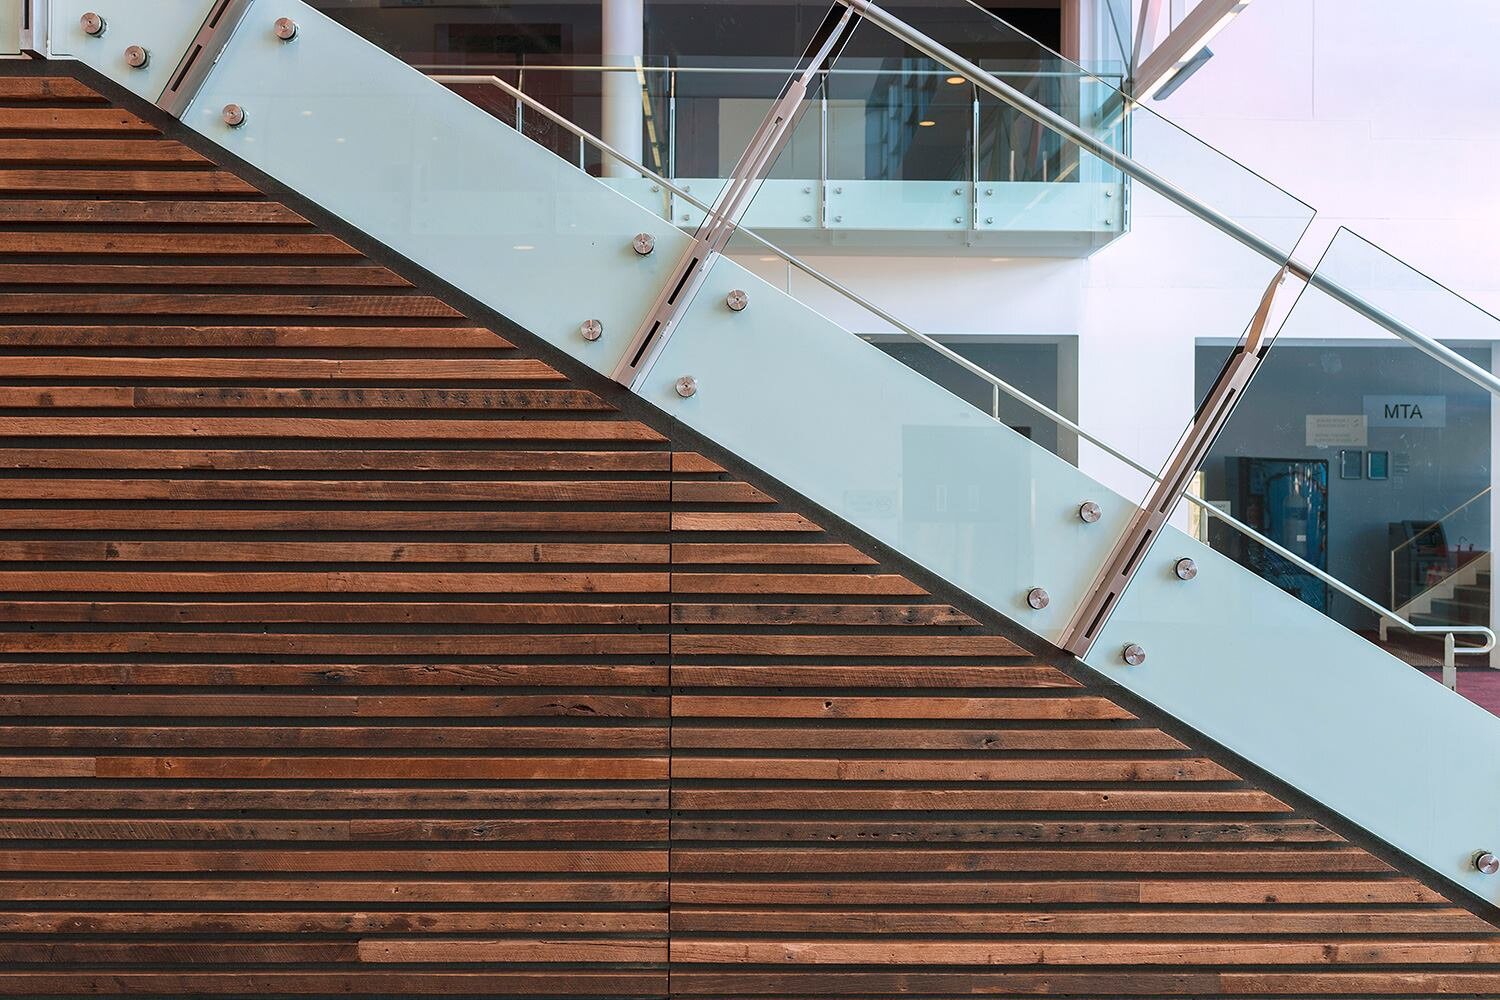 Recycled timber cladding on the staircare of National Convention Centre